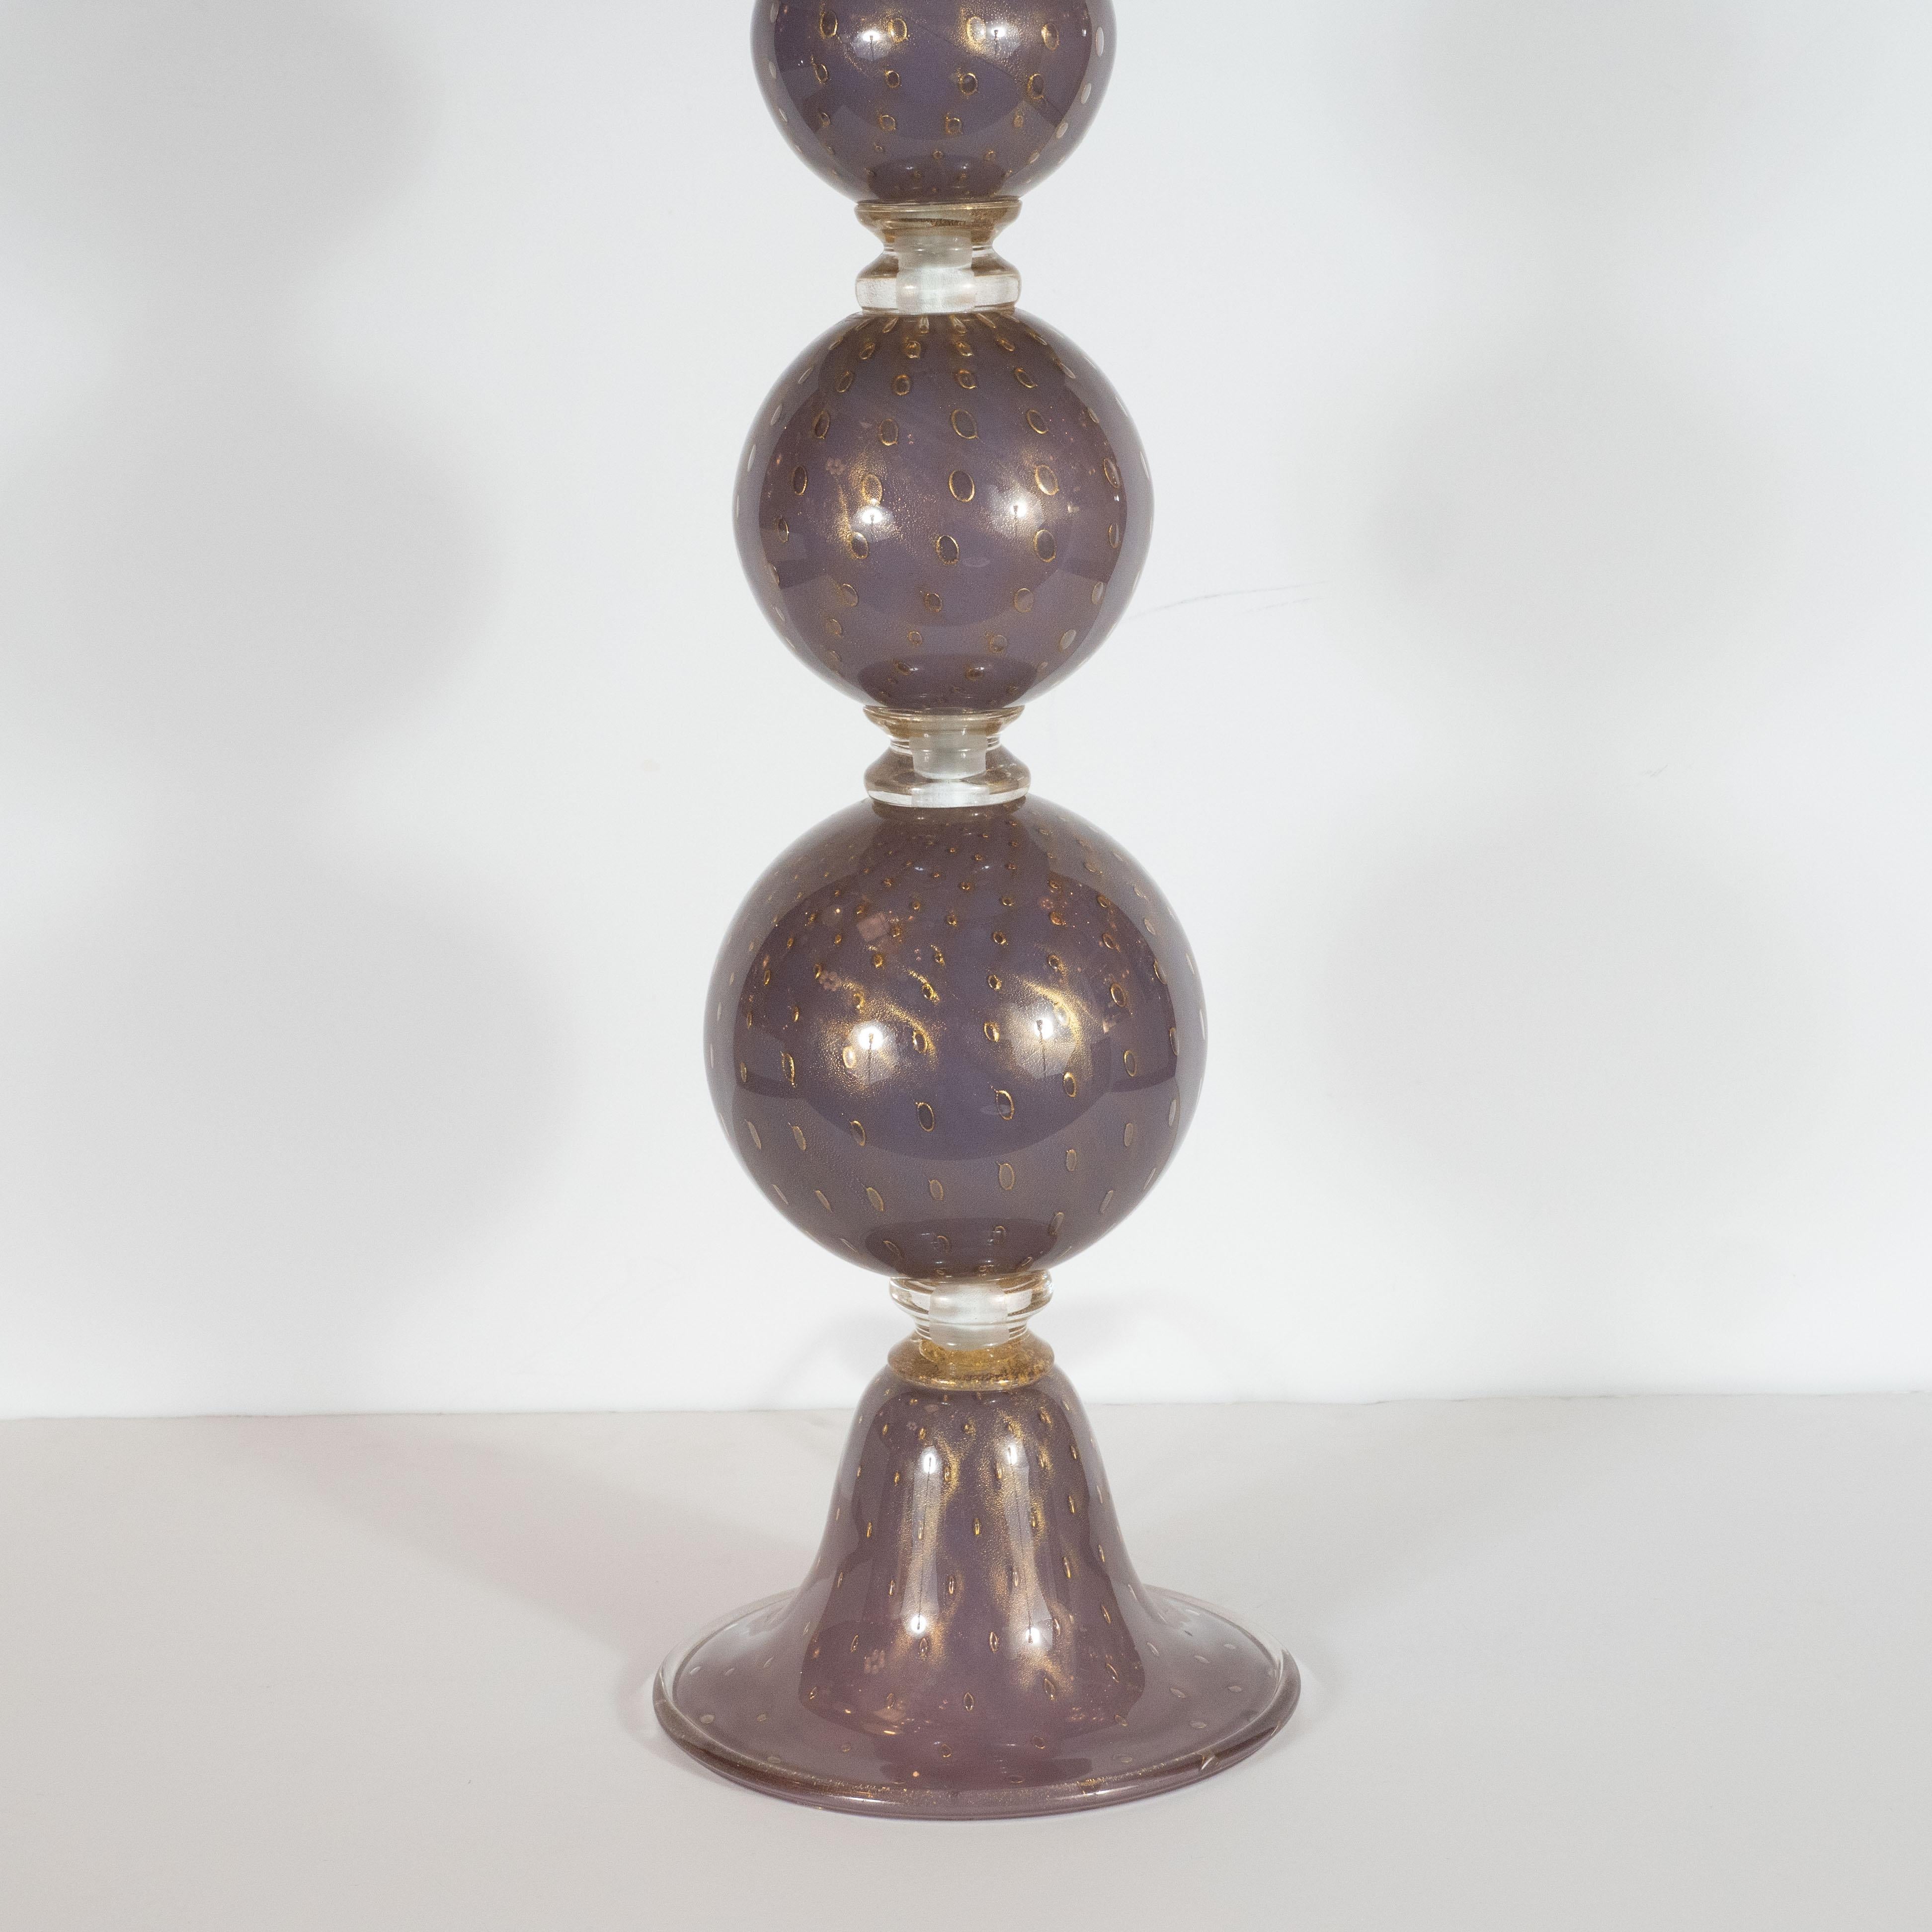 This stunning pair of table lamps were hand blown in Murano, Italy- the island off the coast of Venice renowned for centuries for its superlative glass production. They feature three spherical forms ascending from a conical base with a circular